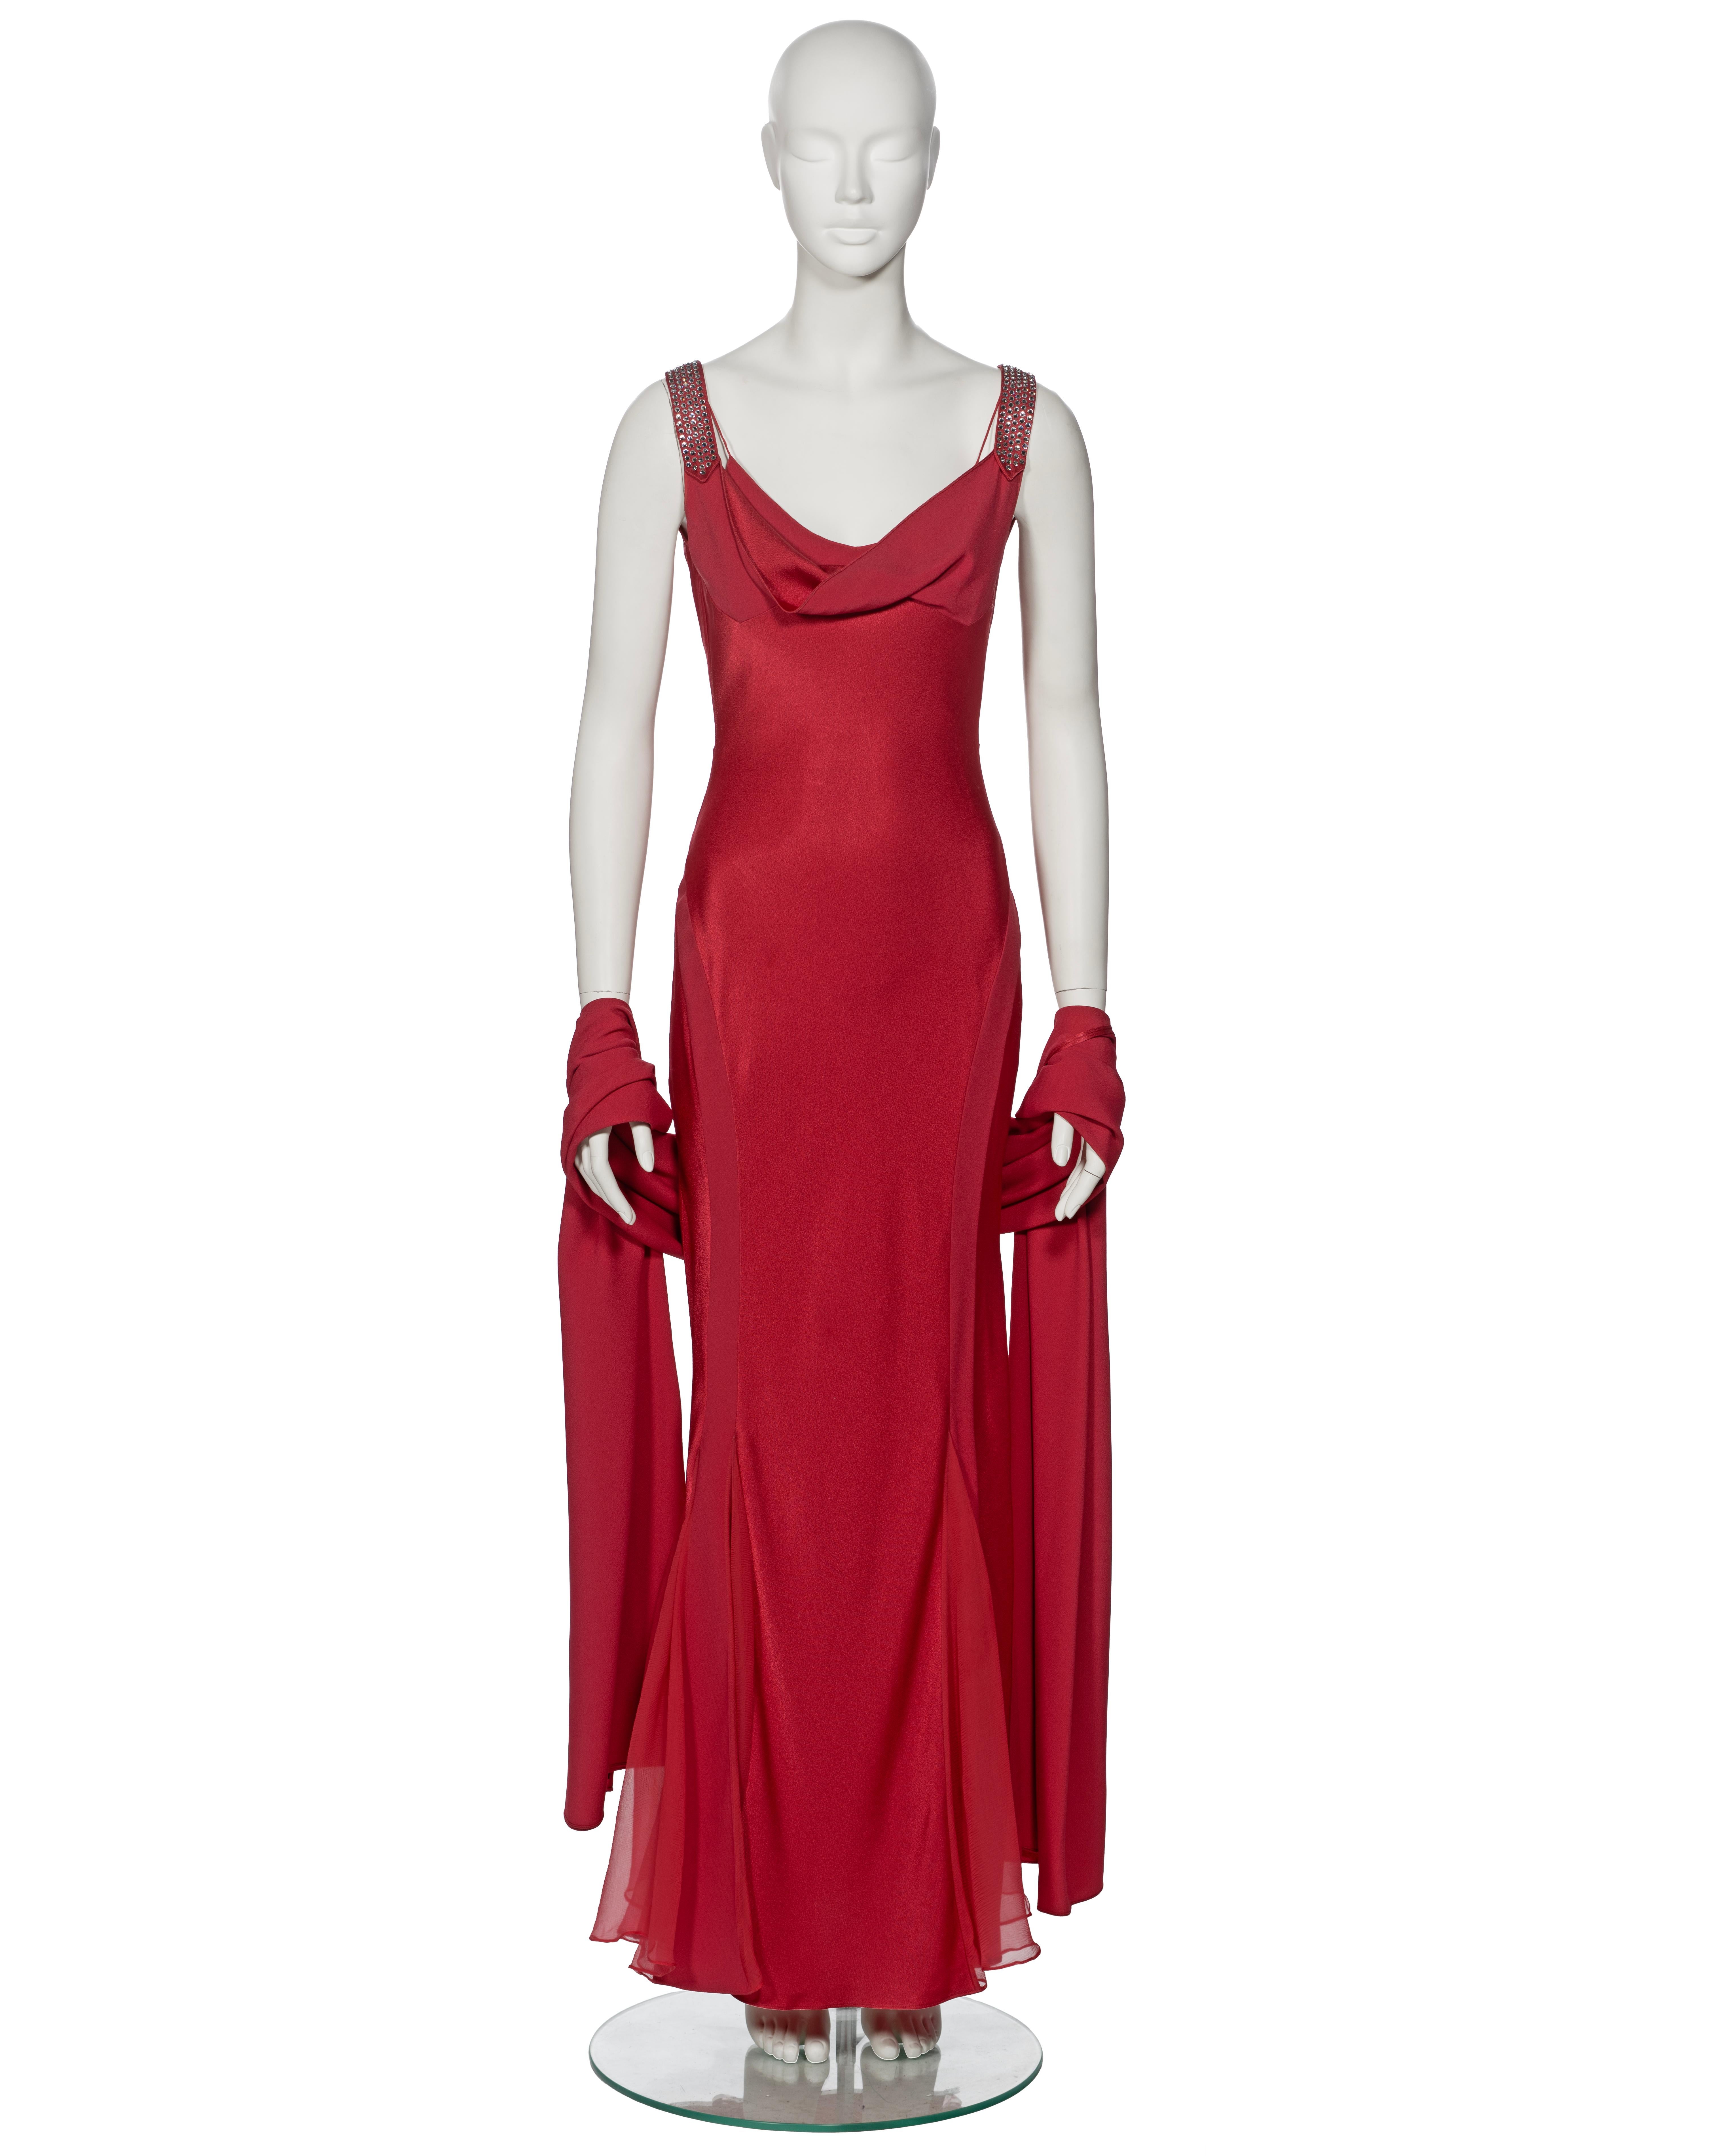 ▪ Archival John Galliano Evening Dress
▪ Spring-Summer 2001
▪ Sold by One of a Kind Archive
▪ Crafted from crimson crepe-back satin, with alternating panels that highlight both the satin sheen and crepe texture
▪ Draped cowl neckline
▪ Double